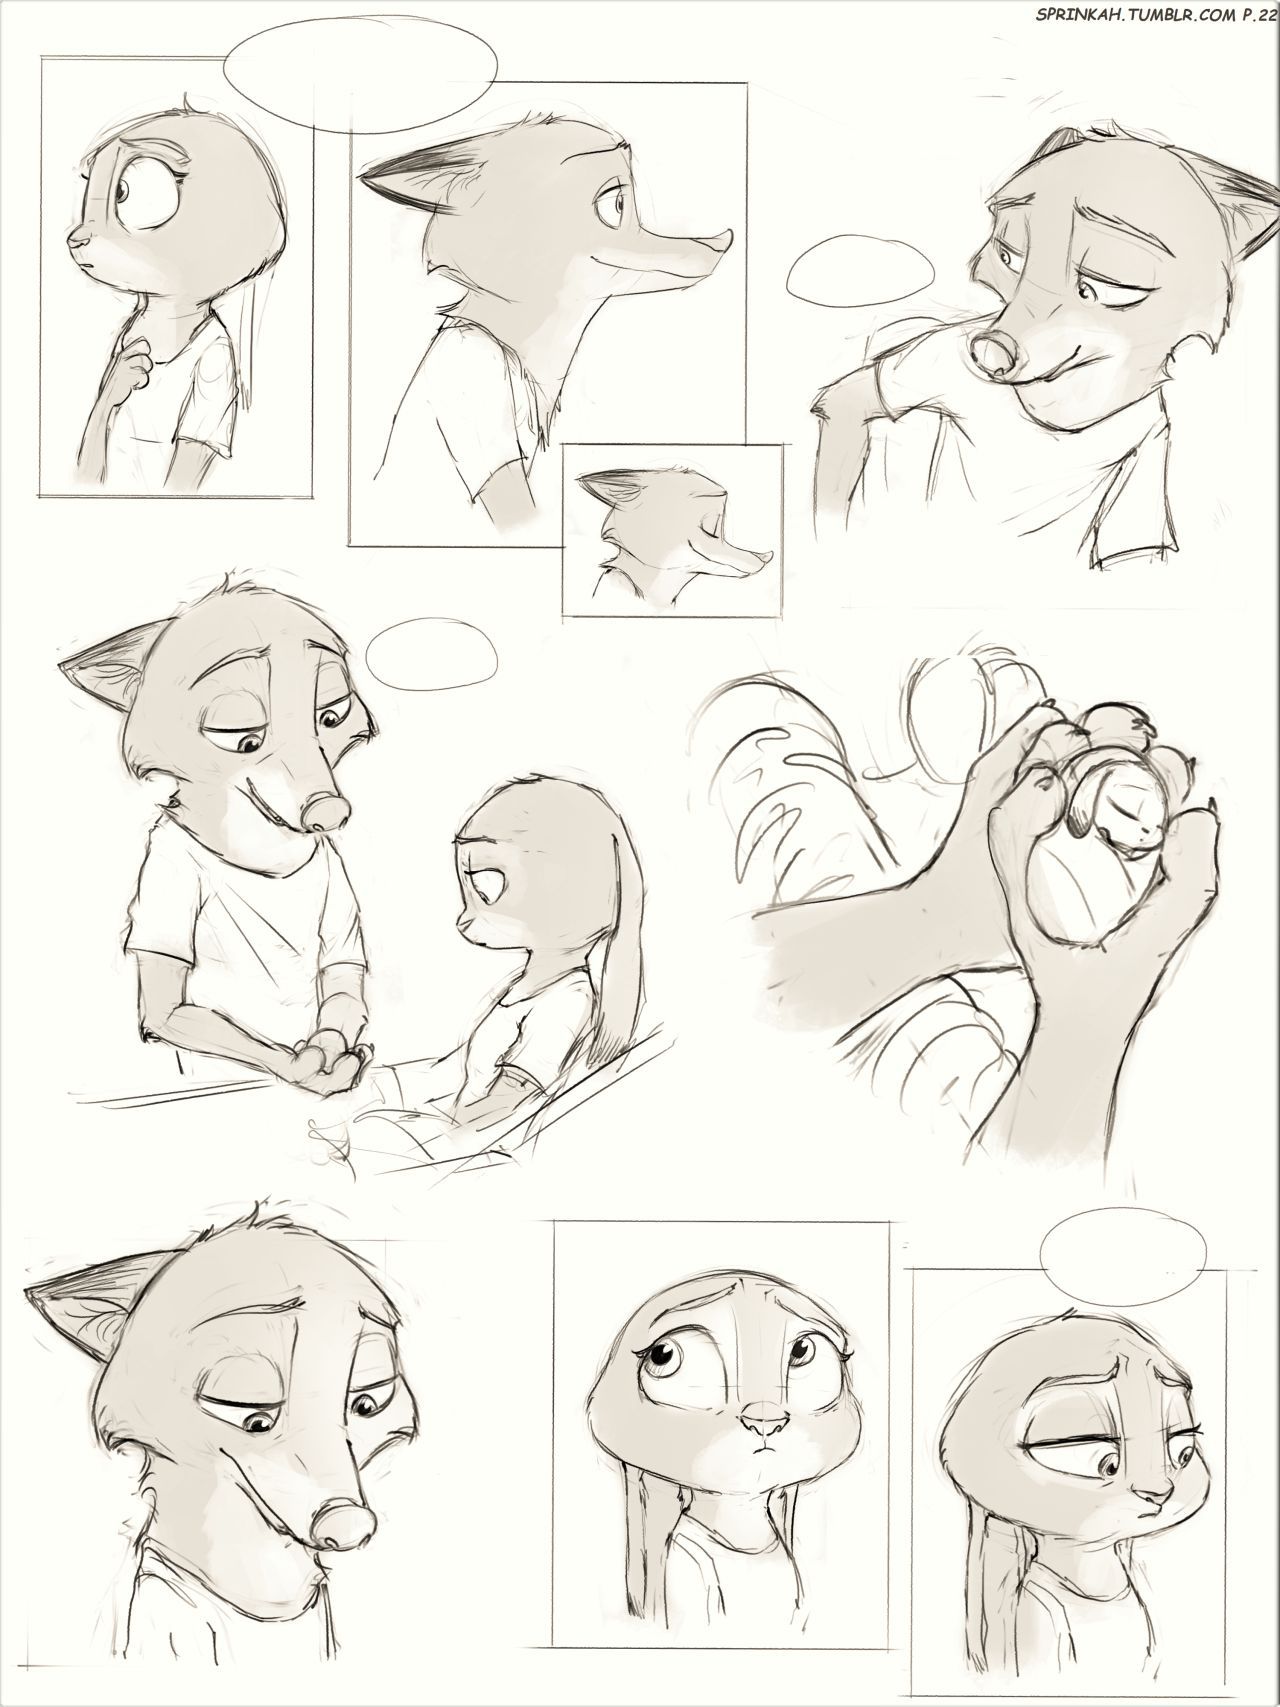 [Sprinkah] This is what true love looks like (Zootopia) (Spanish) (On Going) [Landsec] http://sprinkah.tumblr.com/ 33